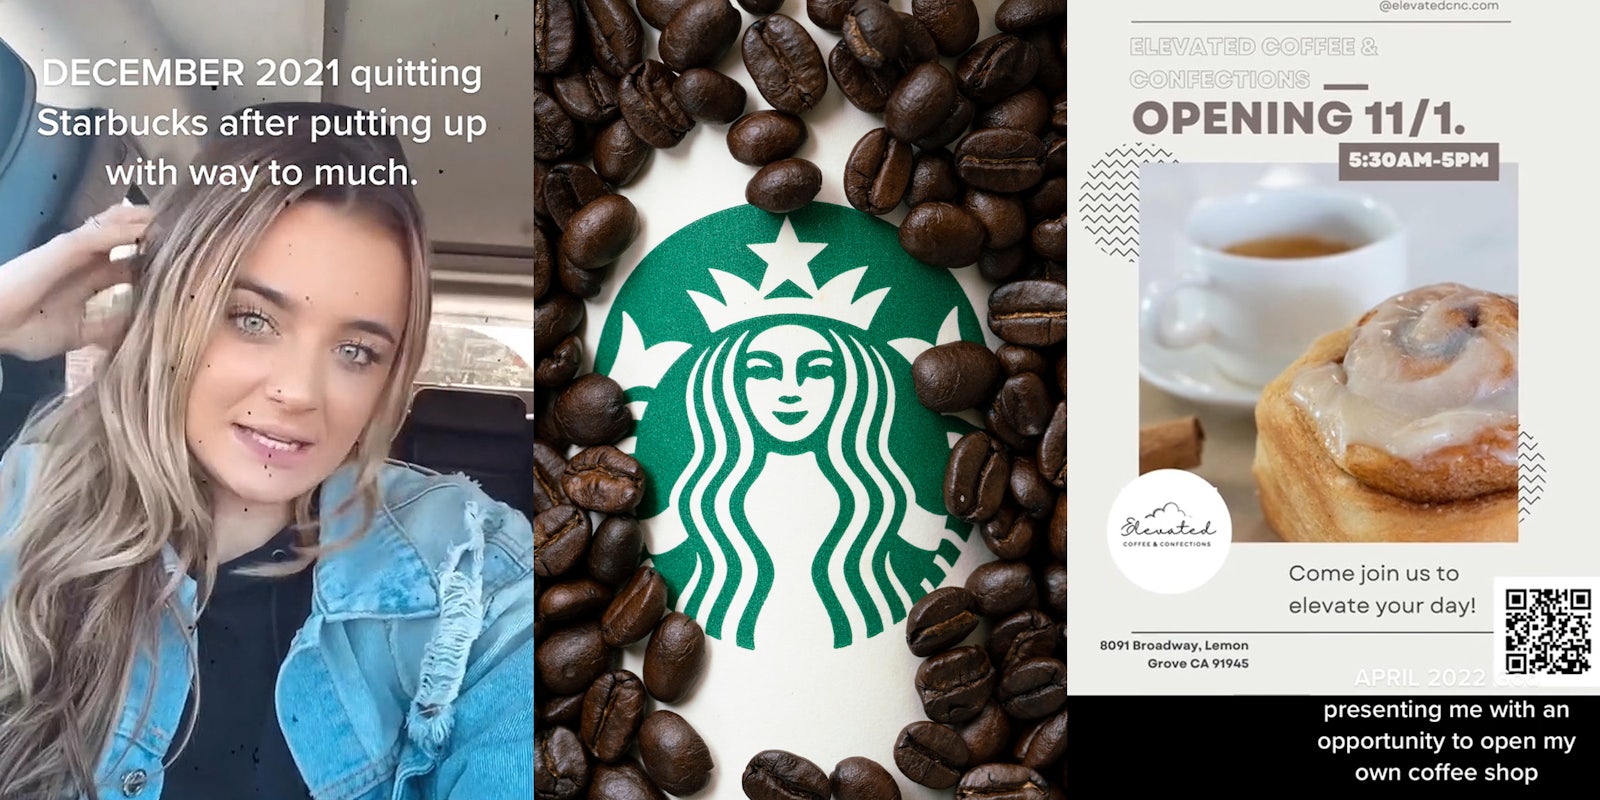 woman speaking in car caption 'DECEMBER 2021 quitting Starbucks after putting up with way to much.' (l) Starbucks logo with coffee beans spread around (c) Elevated Coffee & Confessions shop ad photo of cinnamon bun with coffee caption 'APRIL 2022 presenting me with an opportunity to open my own coffee shop' (r)